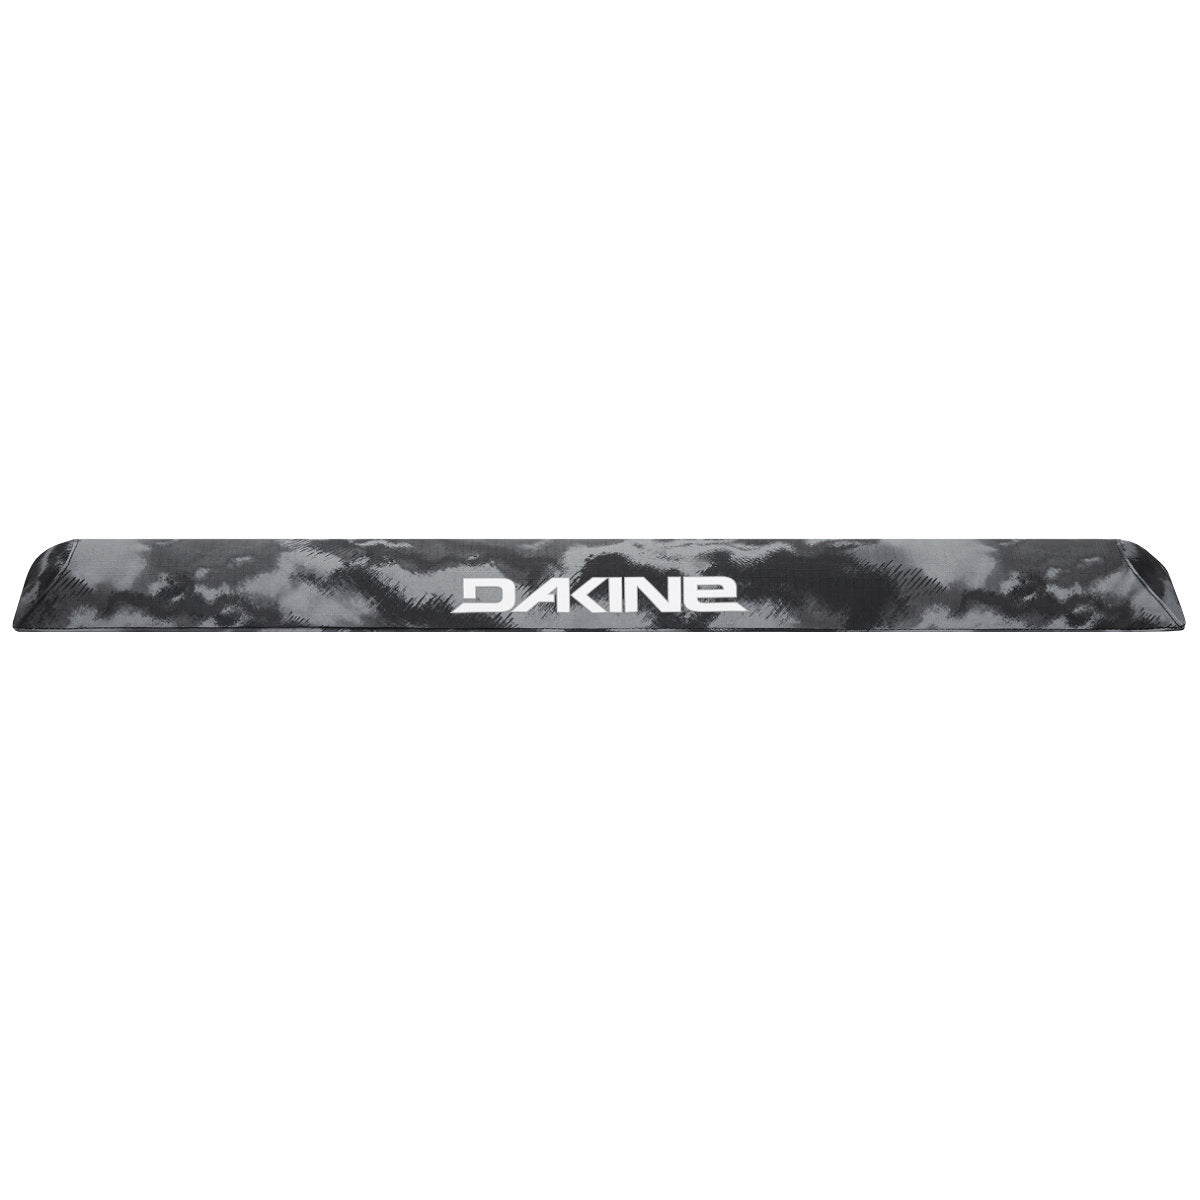 
                  
                    Roof Bar Pads for Surfboards and SUPS - Dakine Aero Rack Pad Extra Long 34" Dark Ashcroft Camo
                  
                